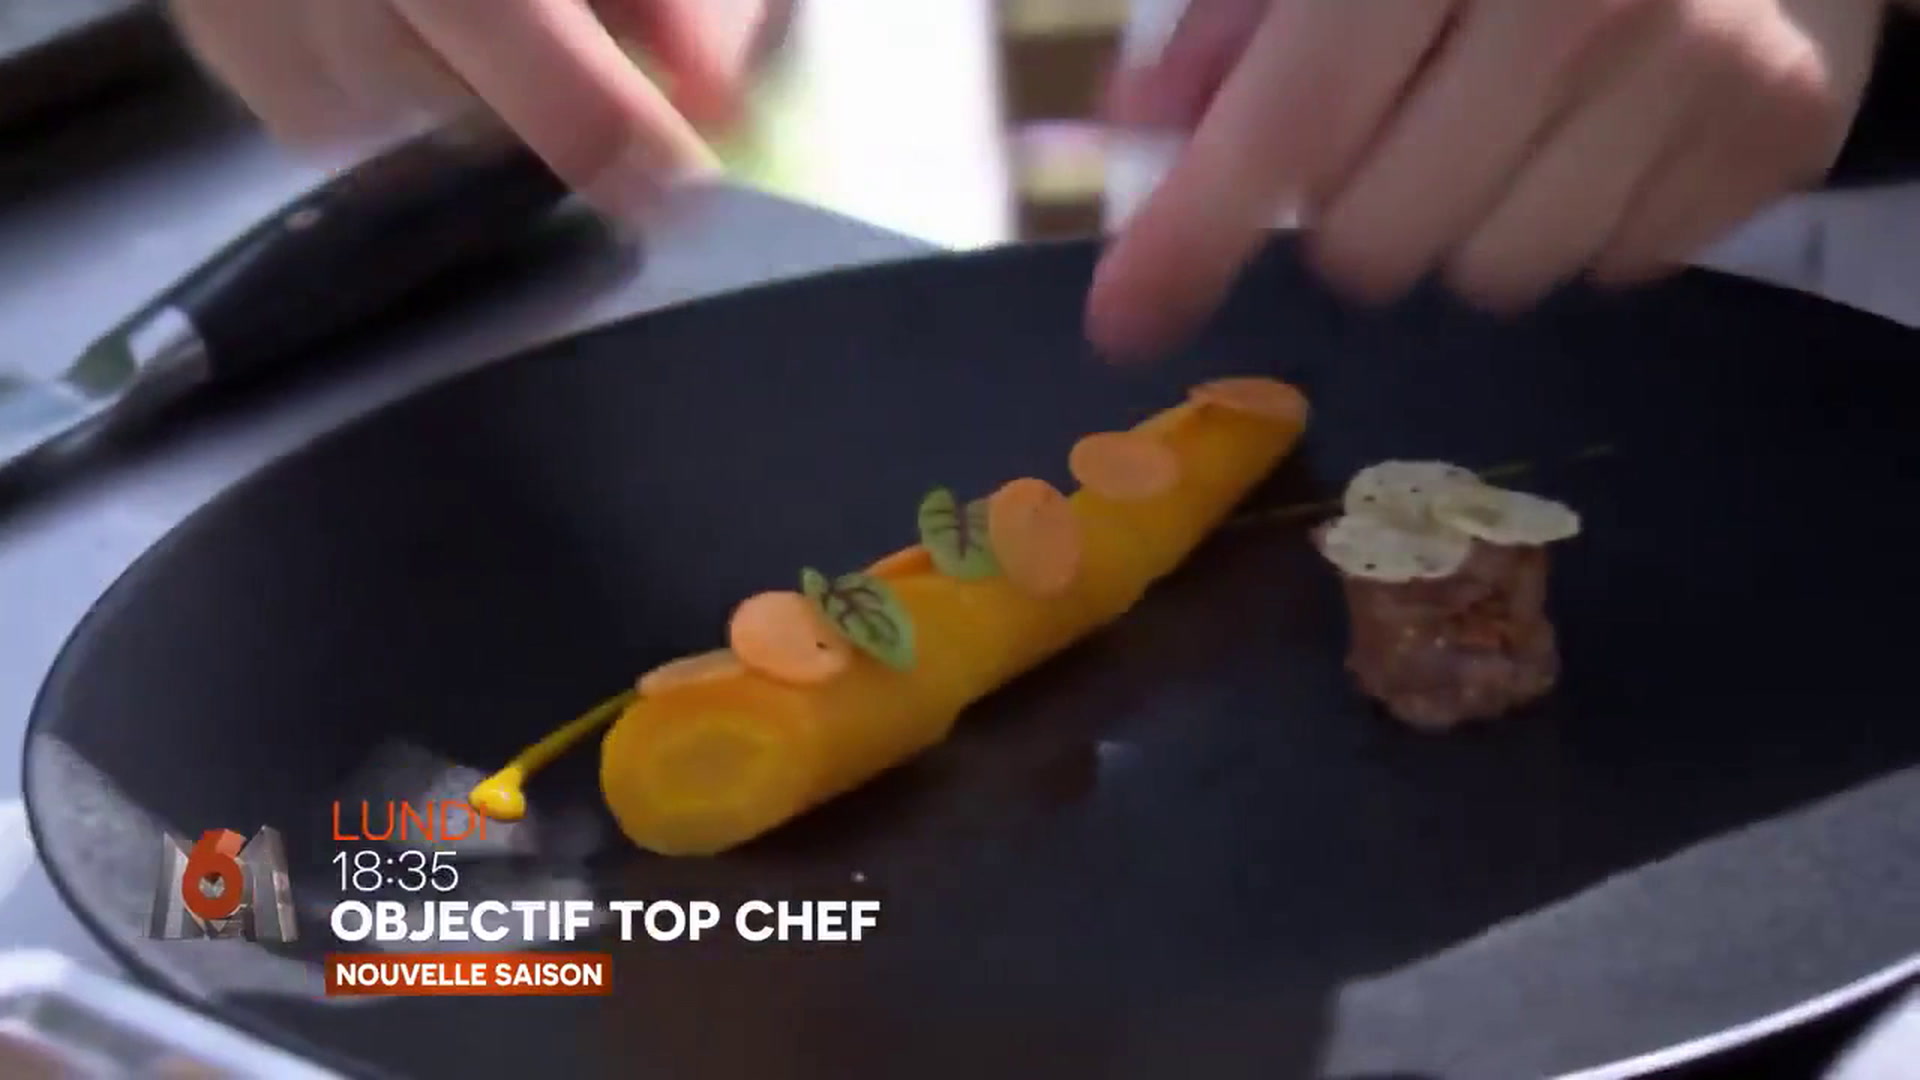 Objectif Top chef : Semaine 1